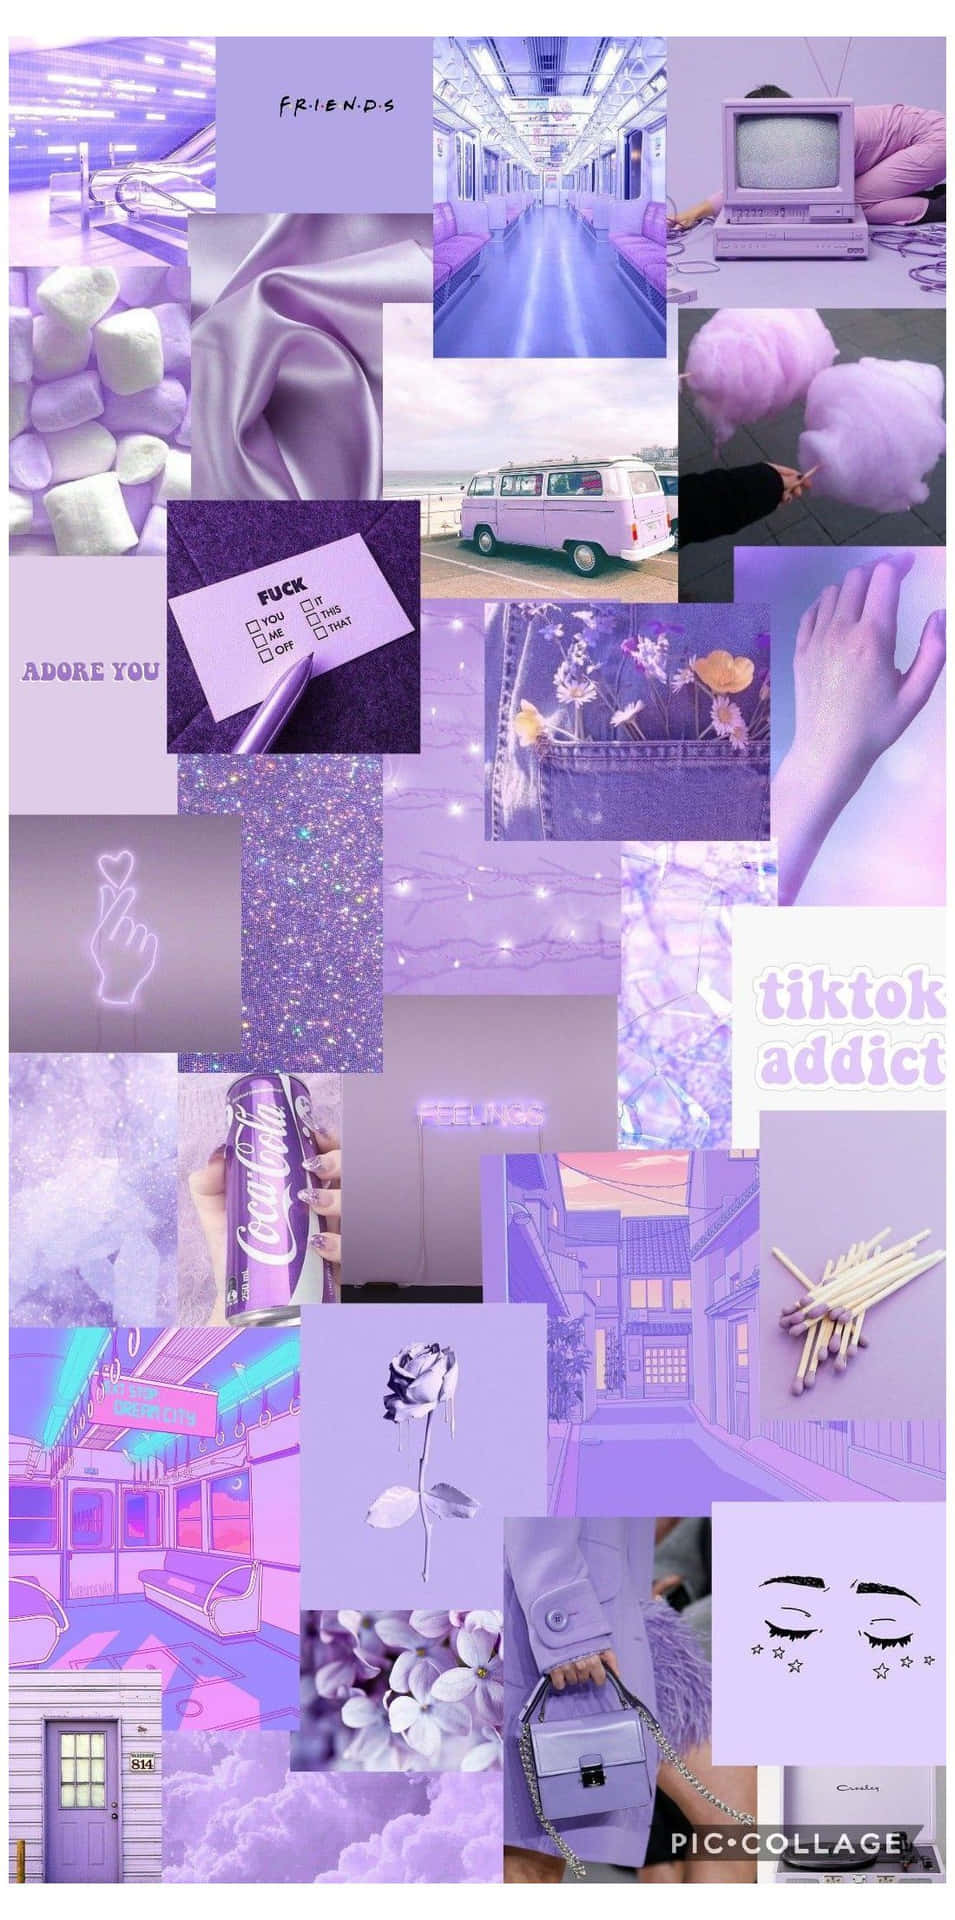 A beautiful aesthetic featuring vintage purple hues. Wallpaper